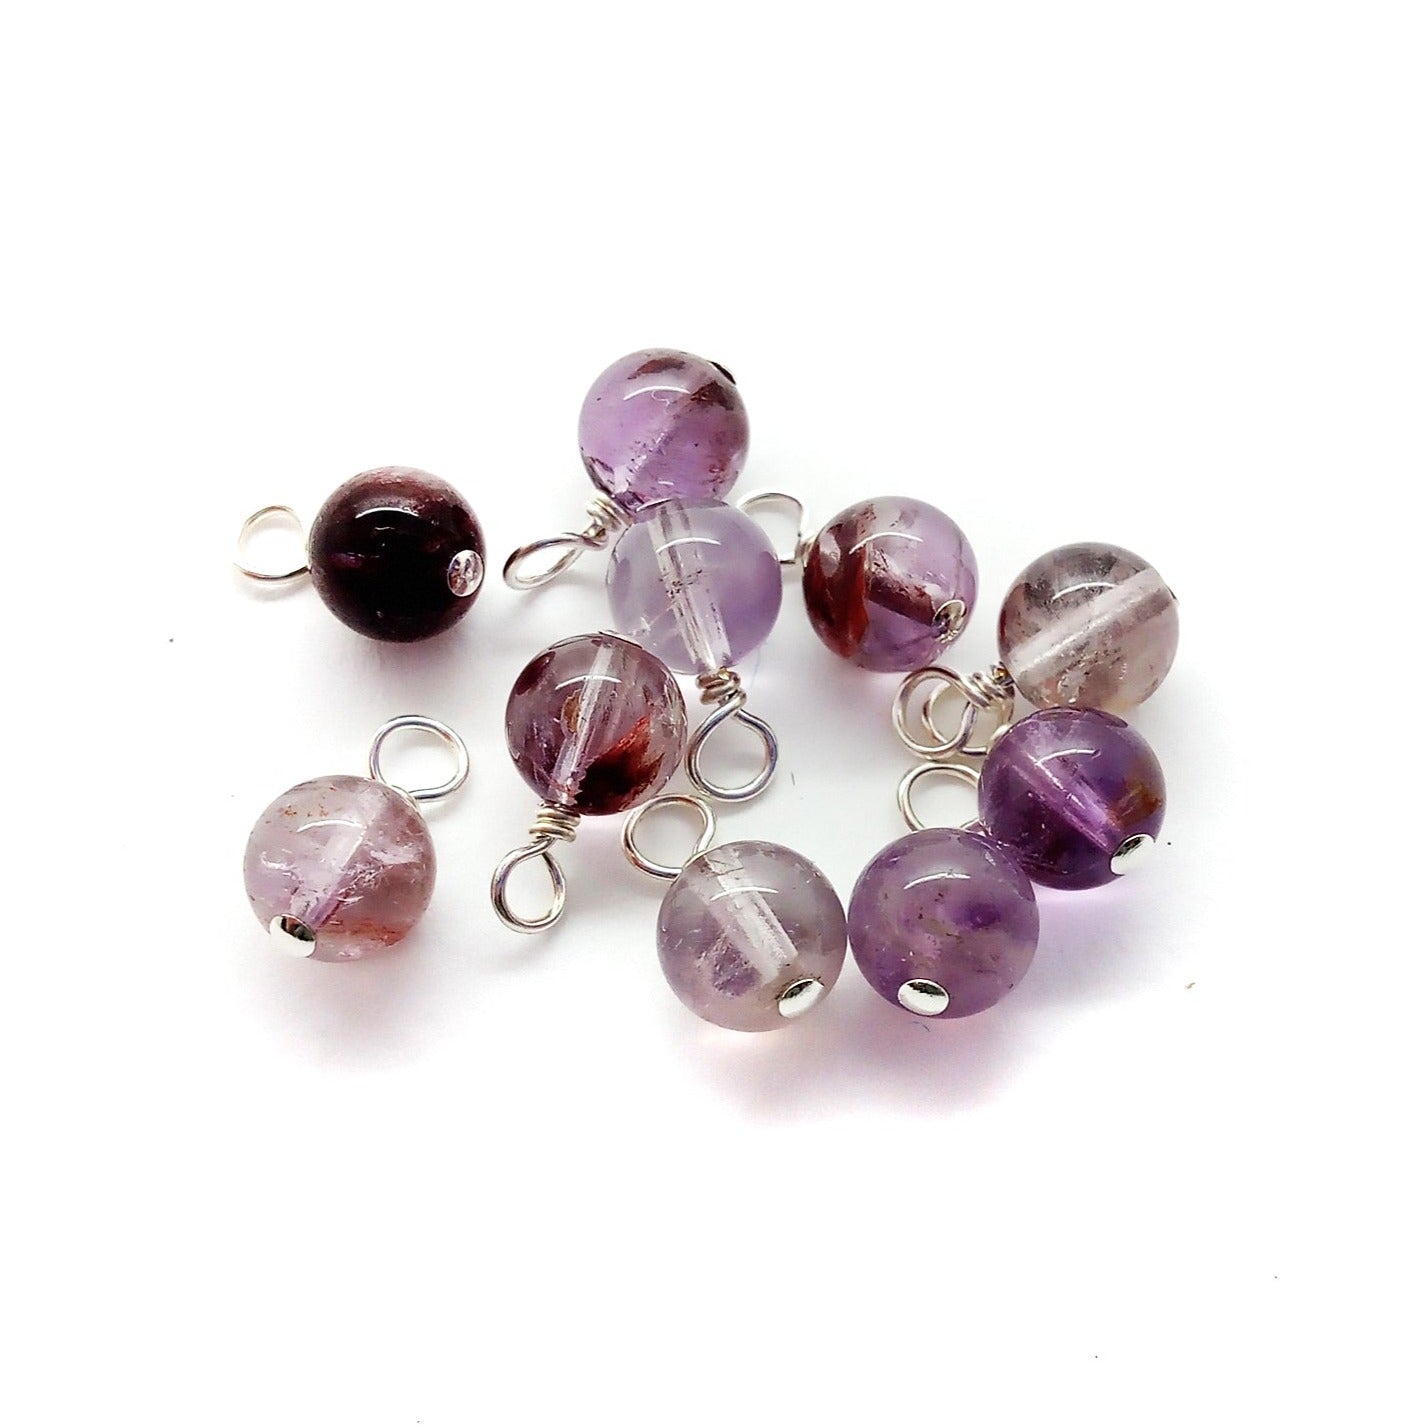 Super Seven 6mm gemstone bead charms, made from a combination of amethyst, cacoxenite, goethite, lepidocrocite, rutile, smoky quartz, and quartz..